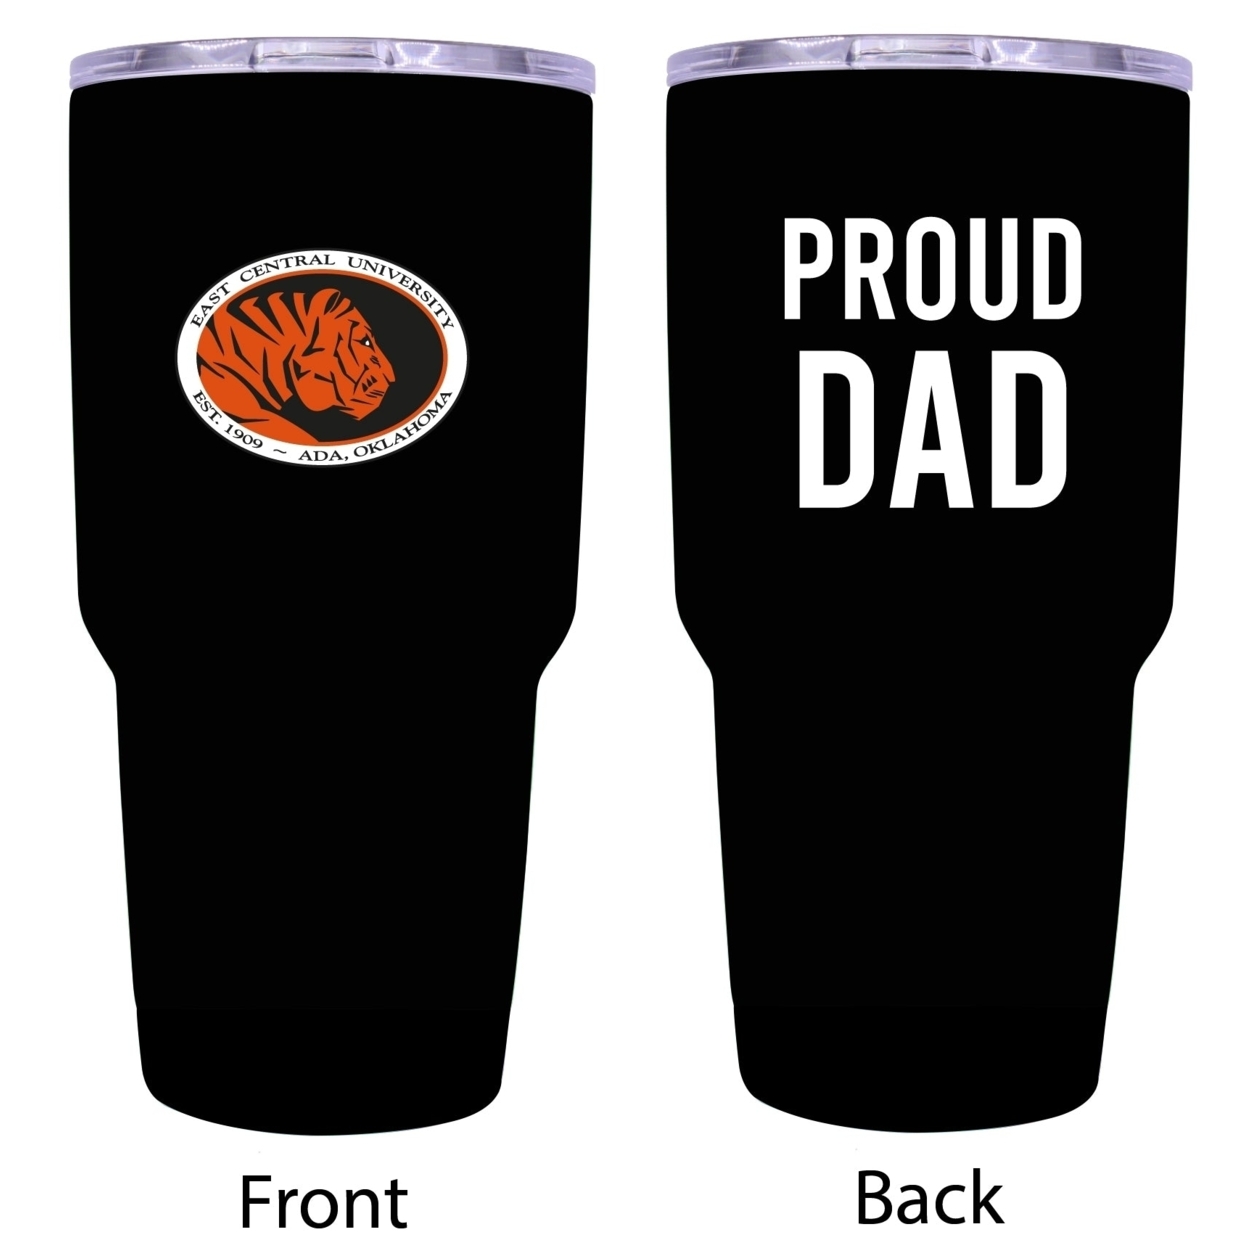 East Central University Proud Dad Insulated Stainless Steel Tumbler